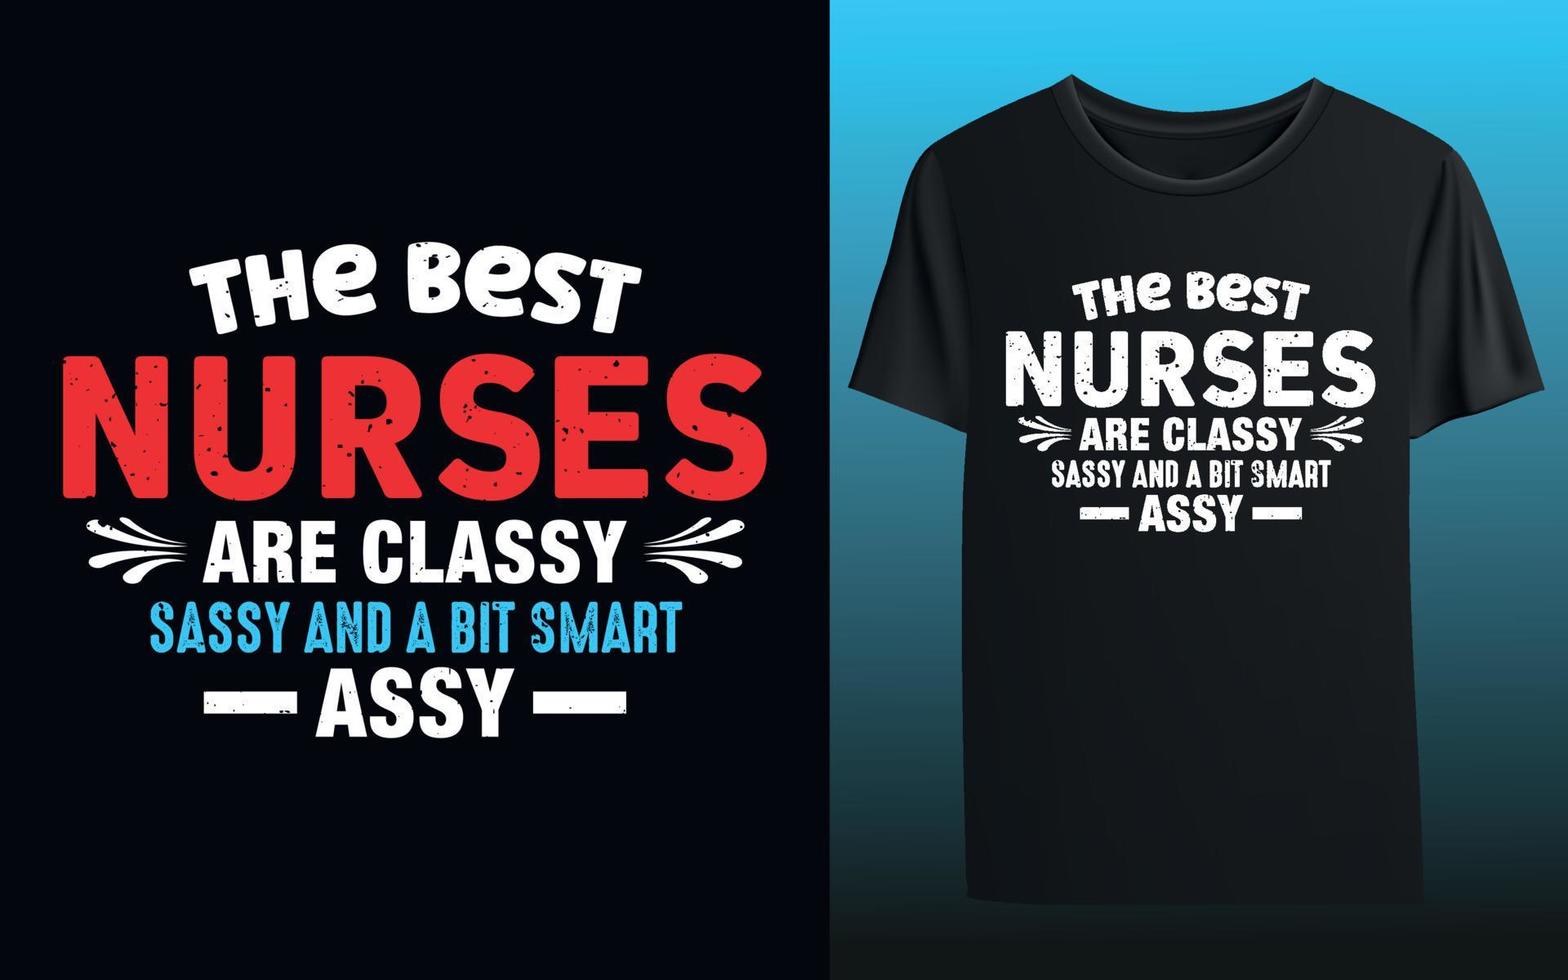 The Best Nurses Are Classy Sassy And A Bit Smart Assy. Nurse Typography T- Shirt Design vector